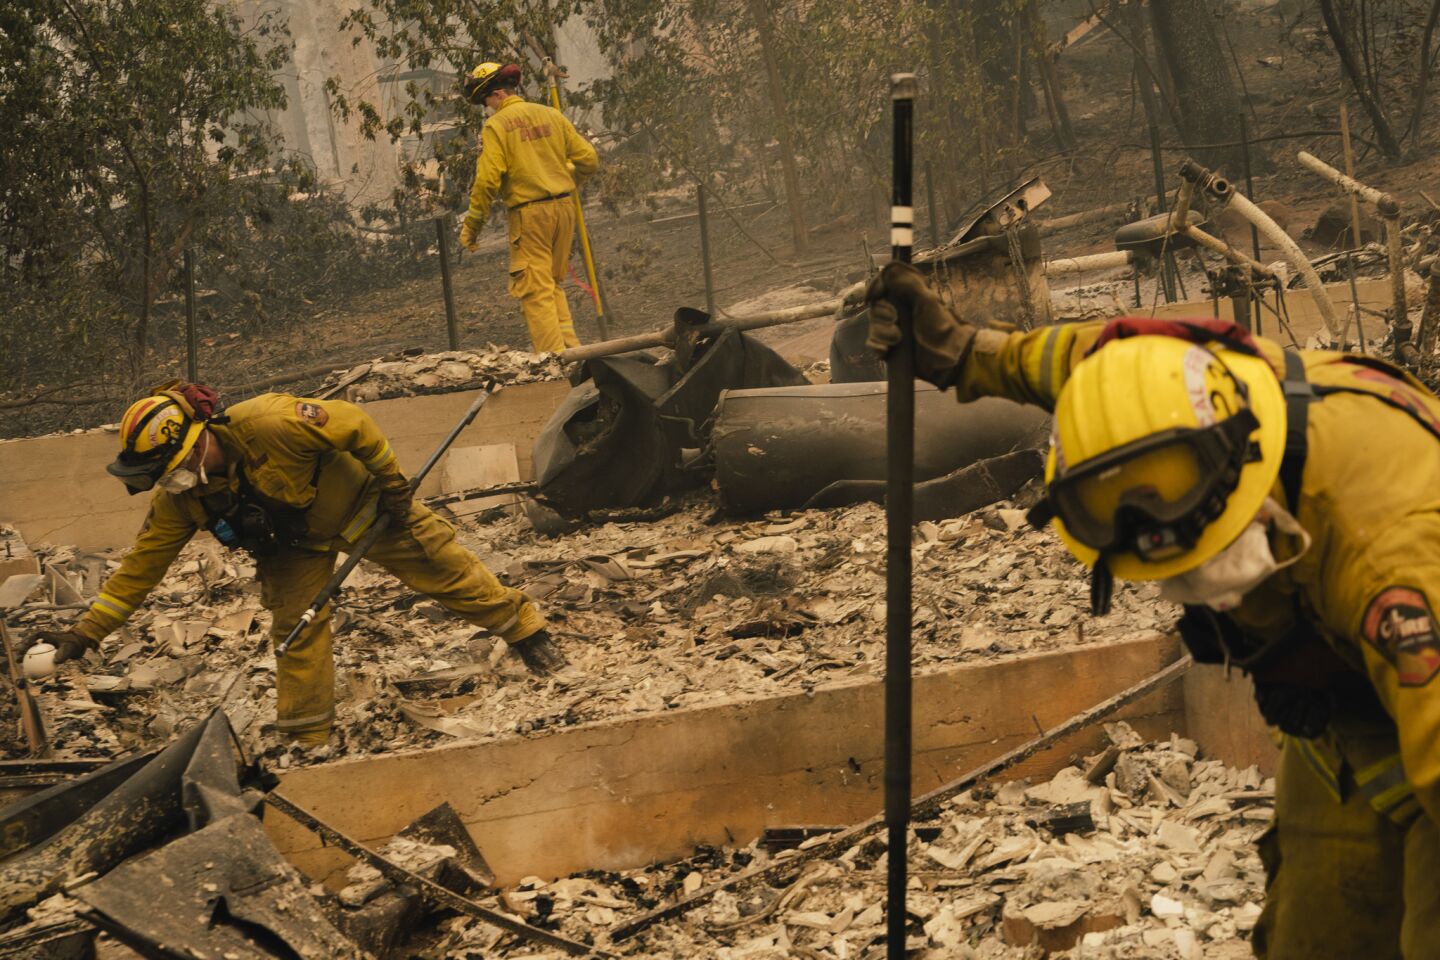 A crew from the California Department of Forestry and Fire Protection walks through the rubble of a home while putting out hot spots in Paradise, Calif.